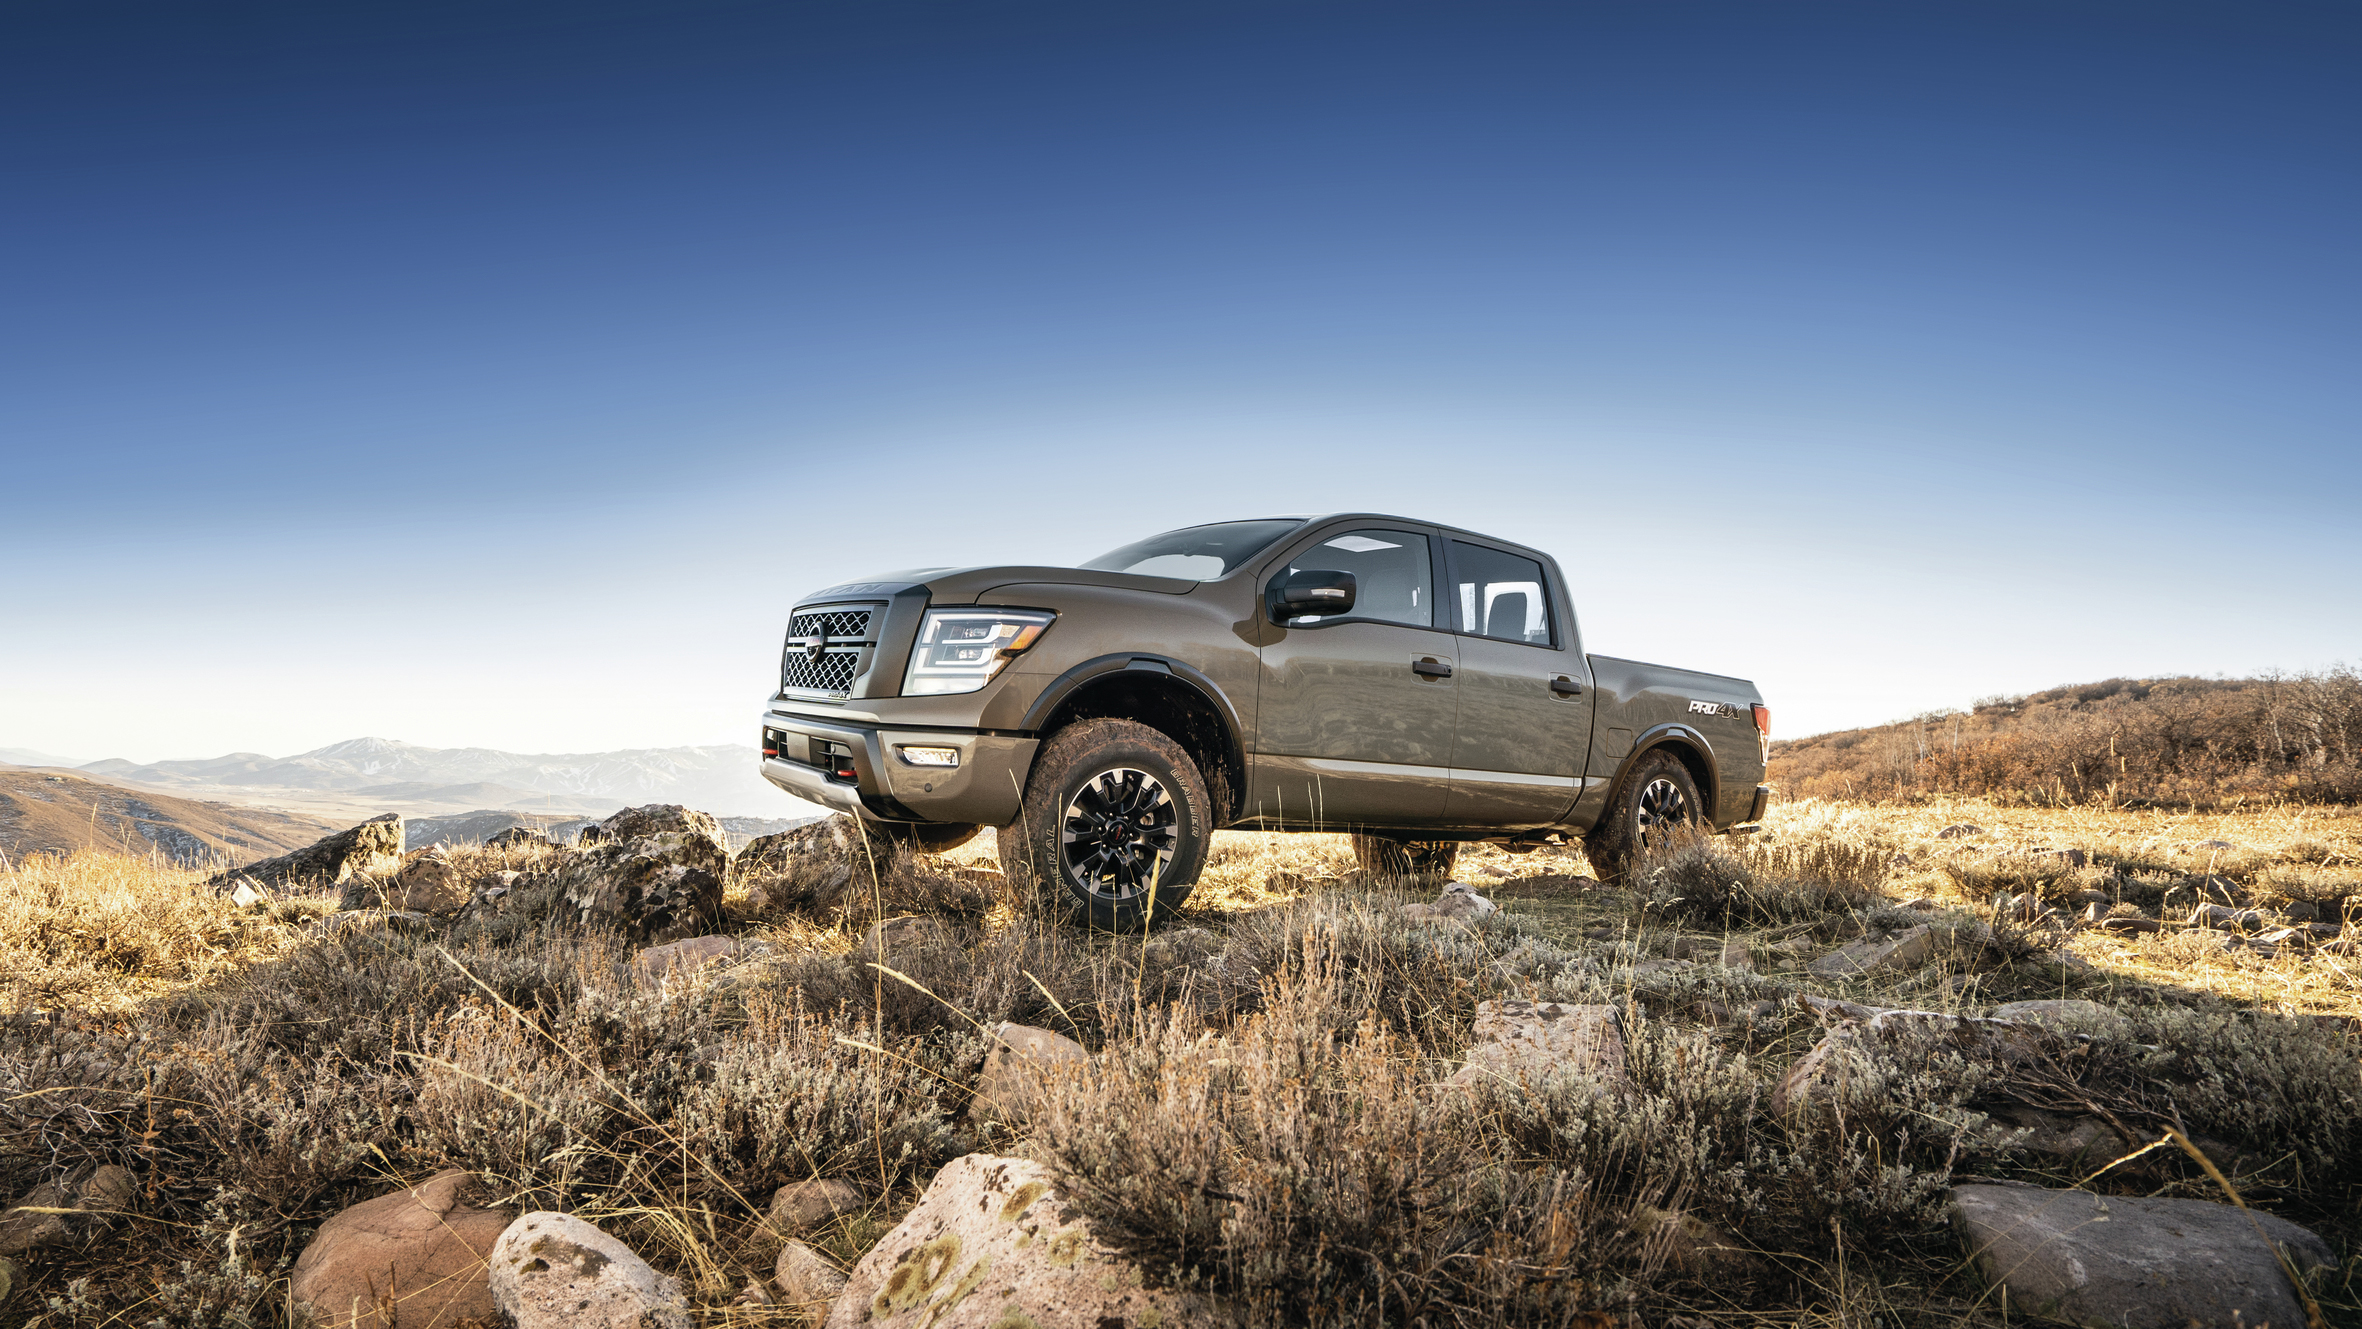 Nissan Titan going offroad on rocks and grass